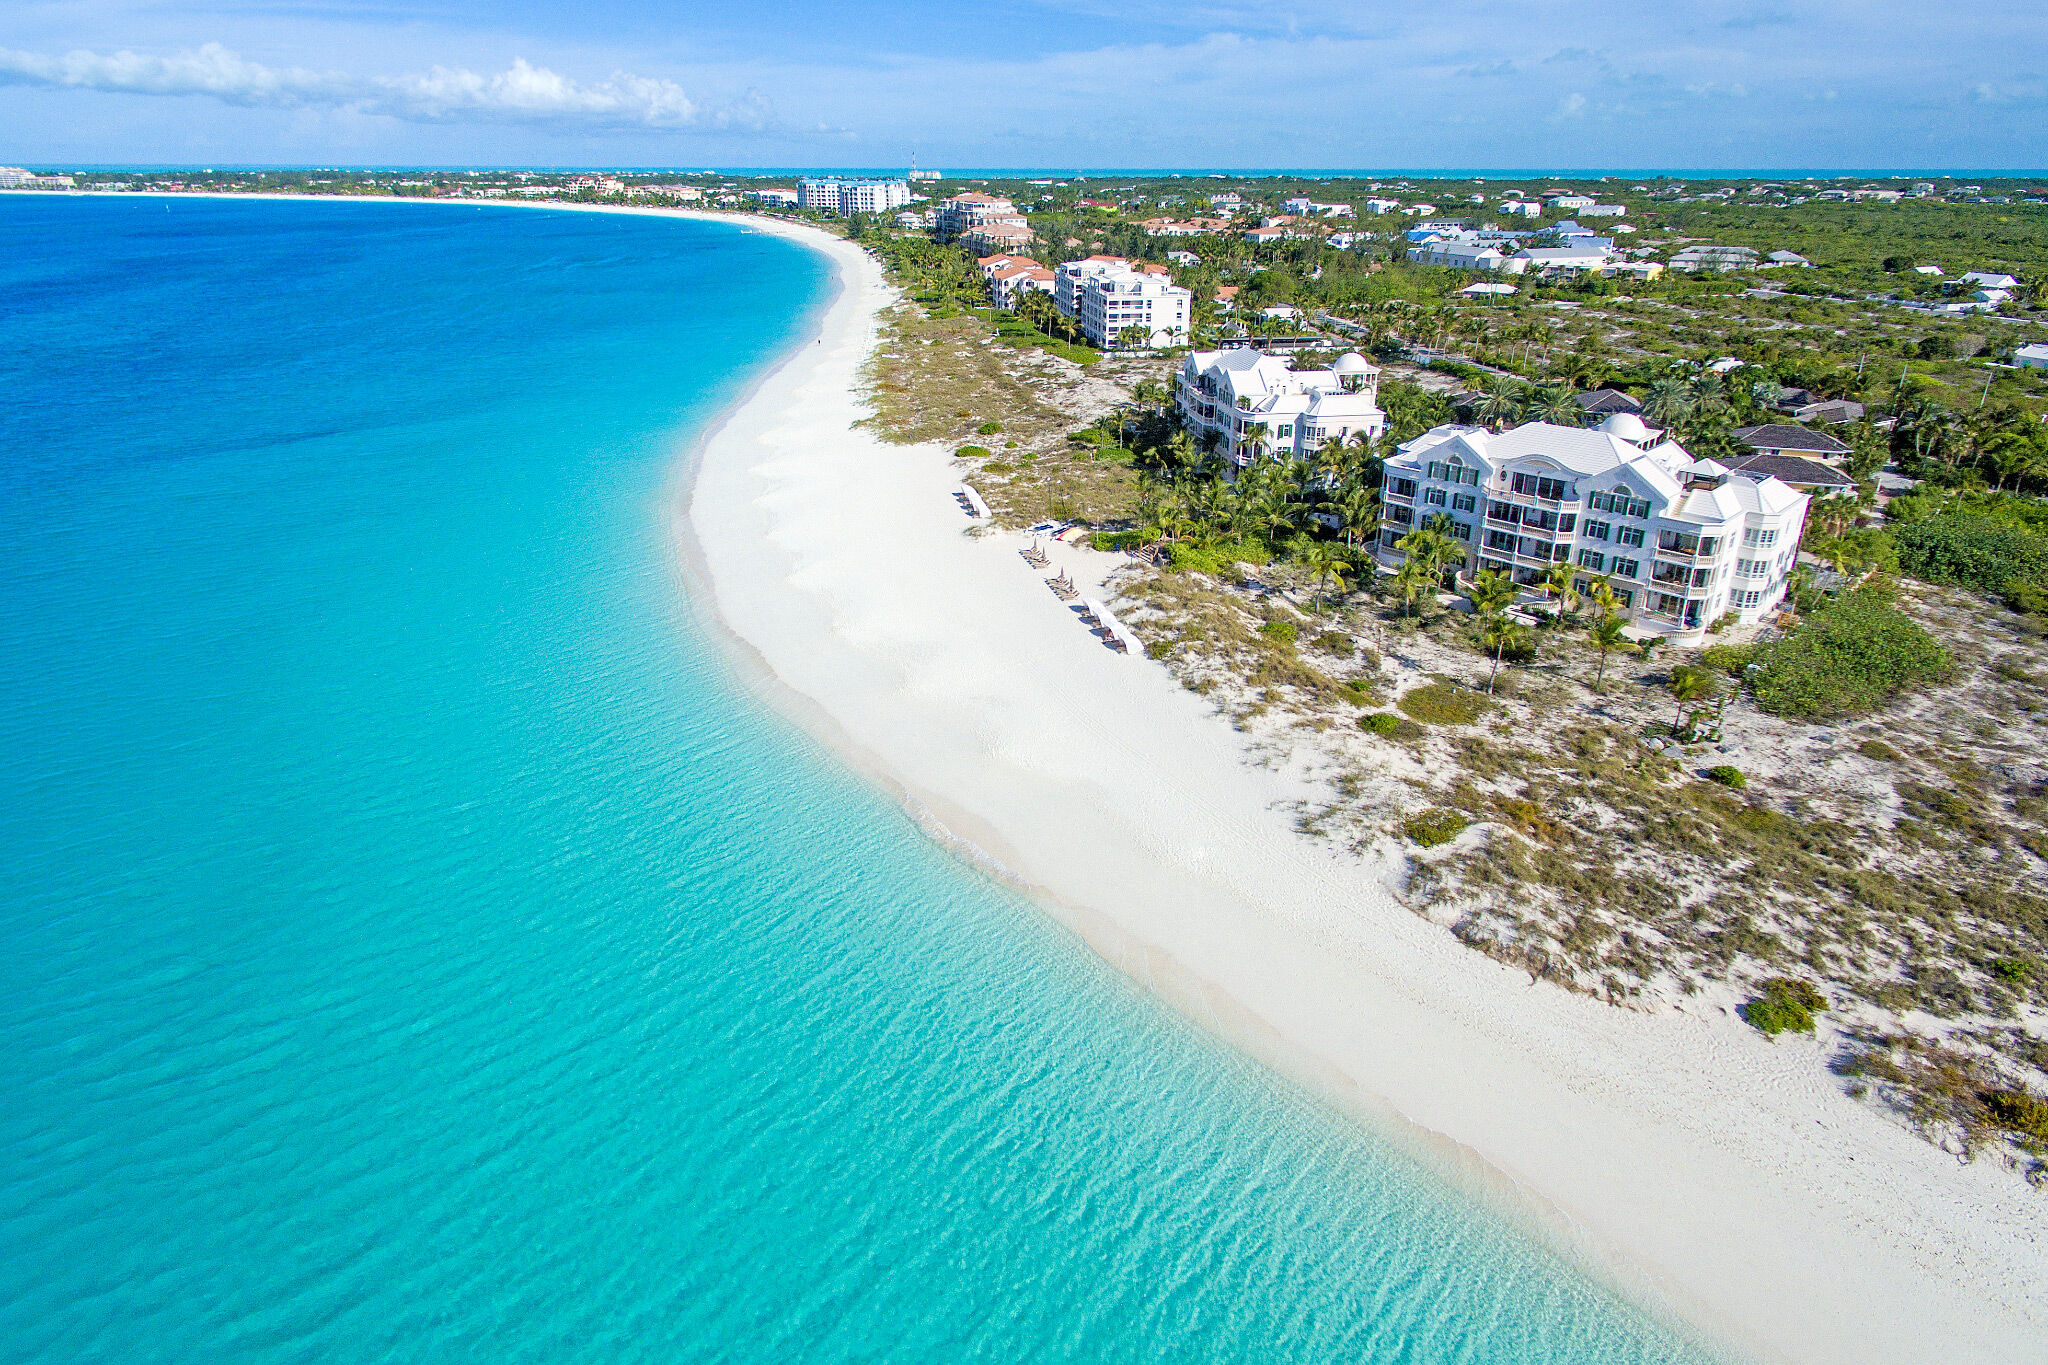 Grace Bay Beach, Providenciales | Visit Turks and Caicos Islands